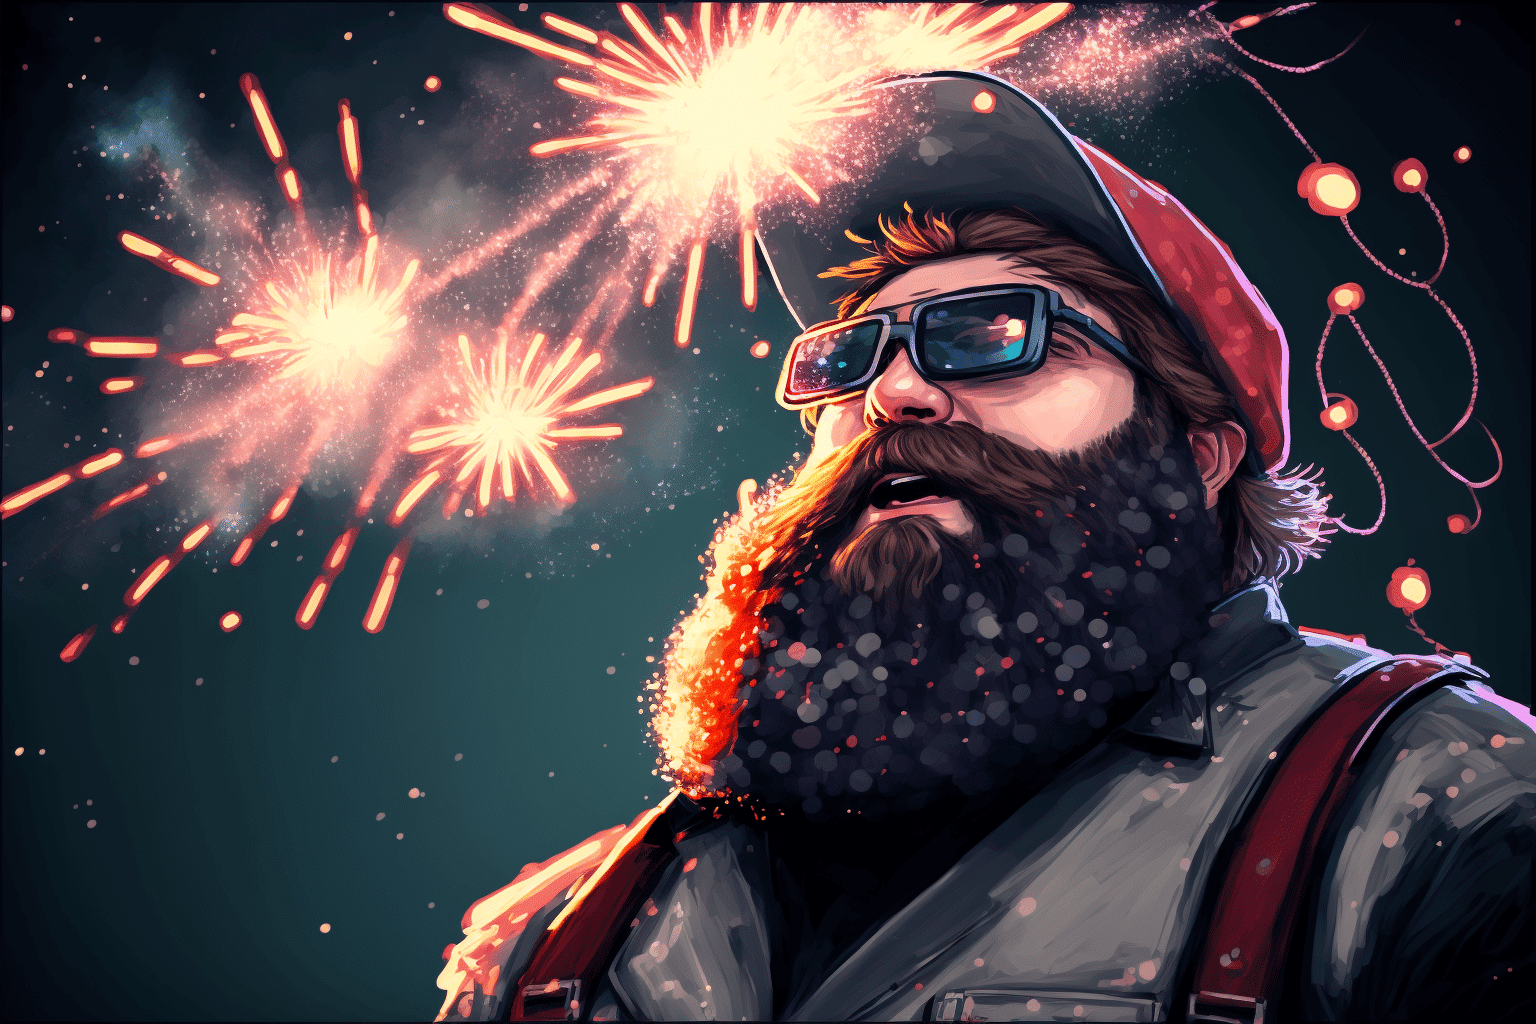 2D man with beard watching fireworks exploding in the sky